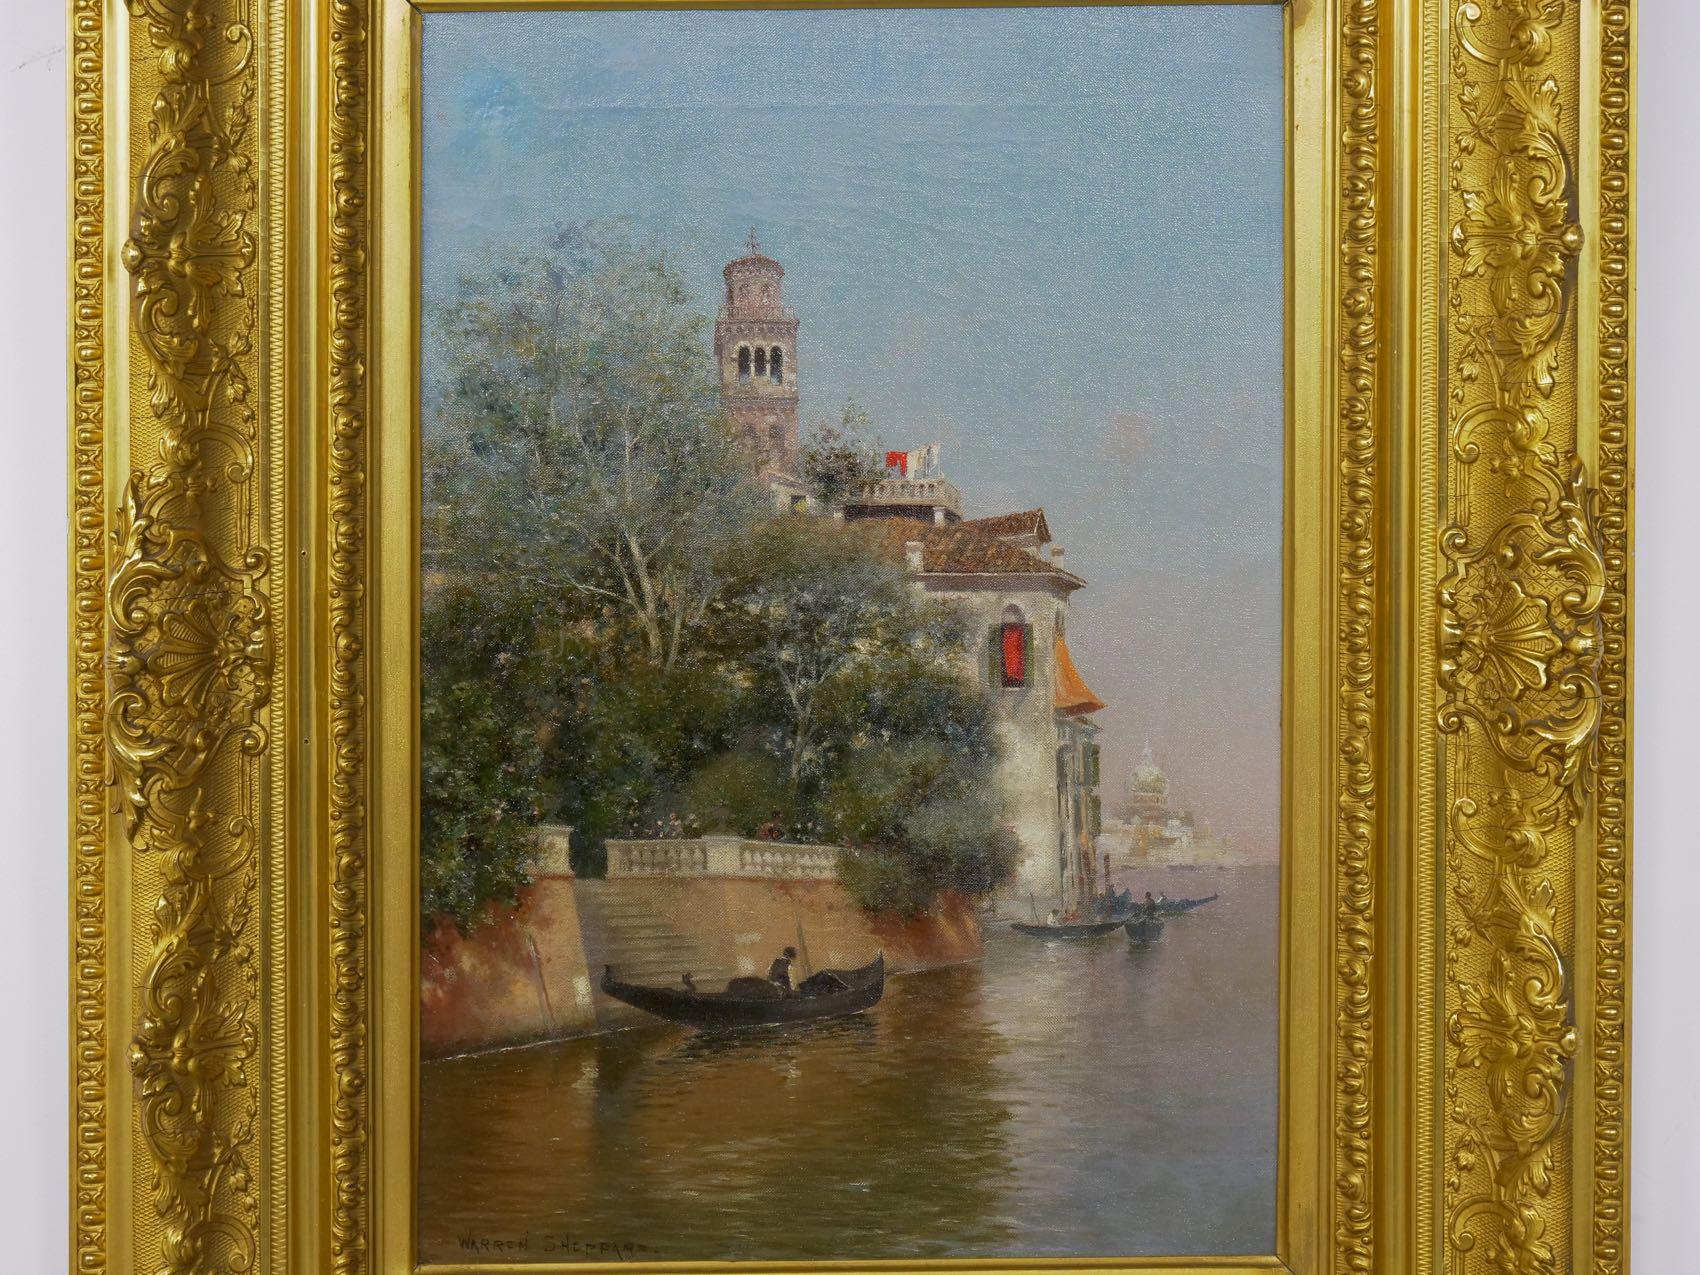 An exquisite little scene that captures a summer day with a view of the canals from Rio del Giardini in Venice. A gondolier has pulled his boat up along the stone bank, perhaps pausing to collect a passenger from the descending steps. The terrace